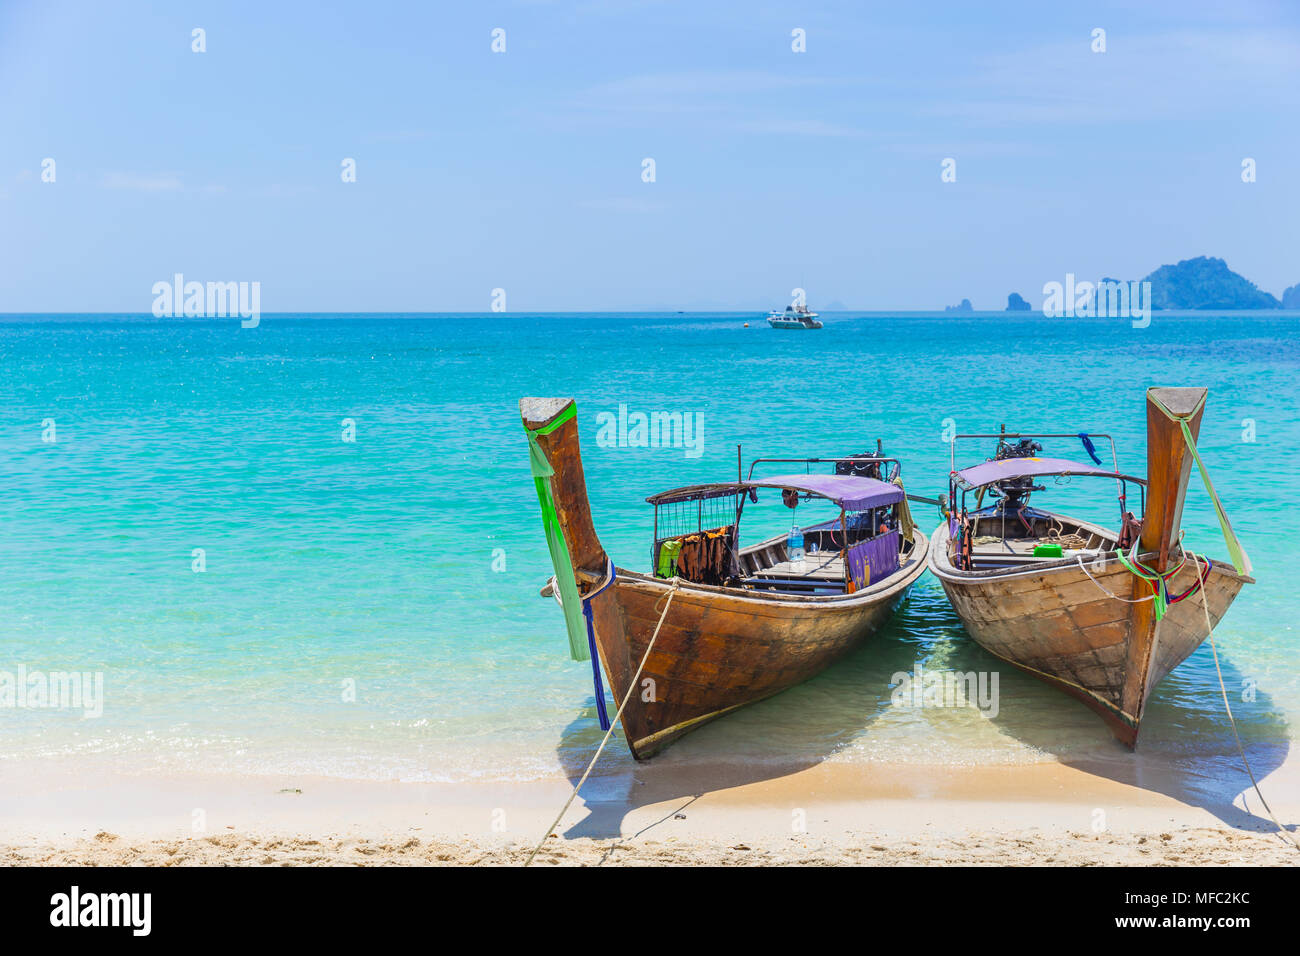 Thailand Andaman Sea Travel with Long tail boats on Tropical beach Summer Holiday Stock Photo